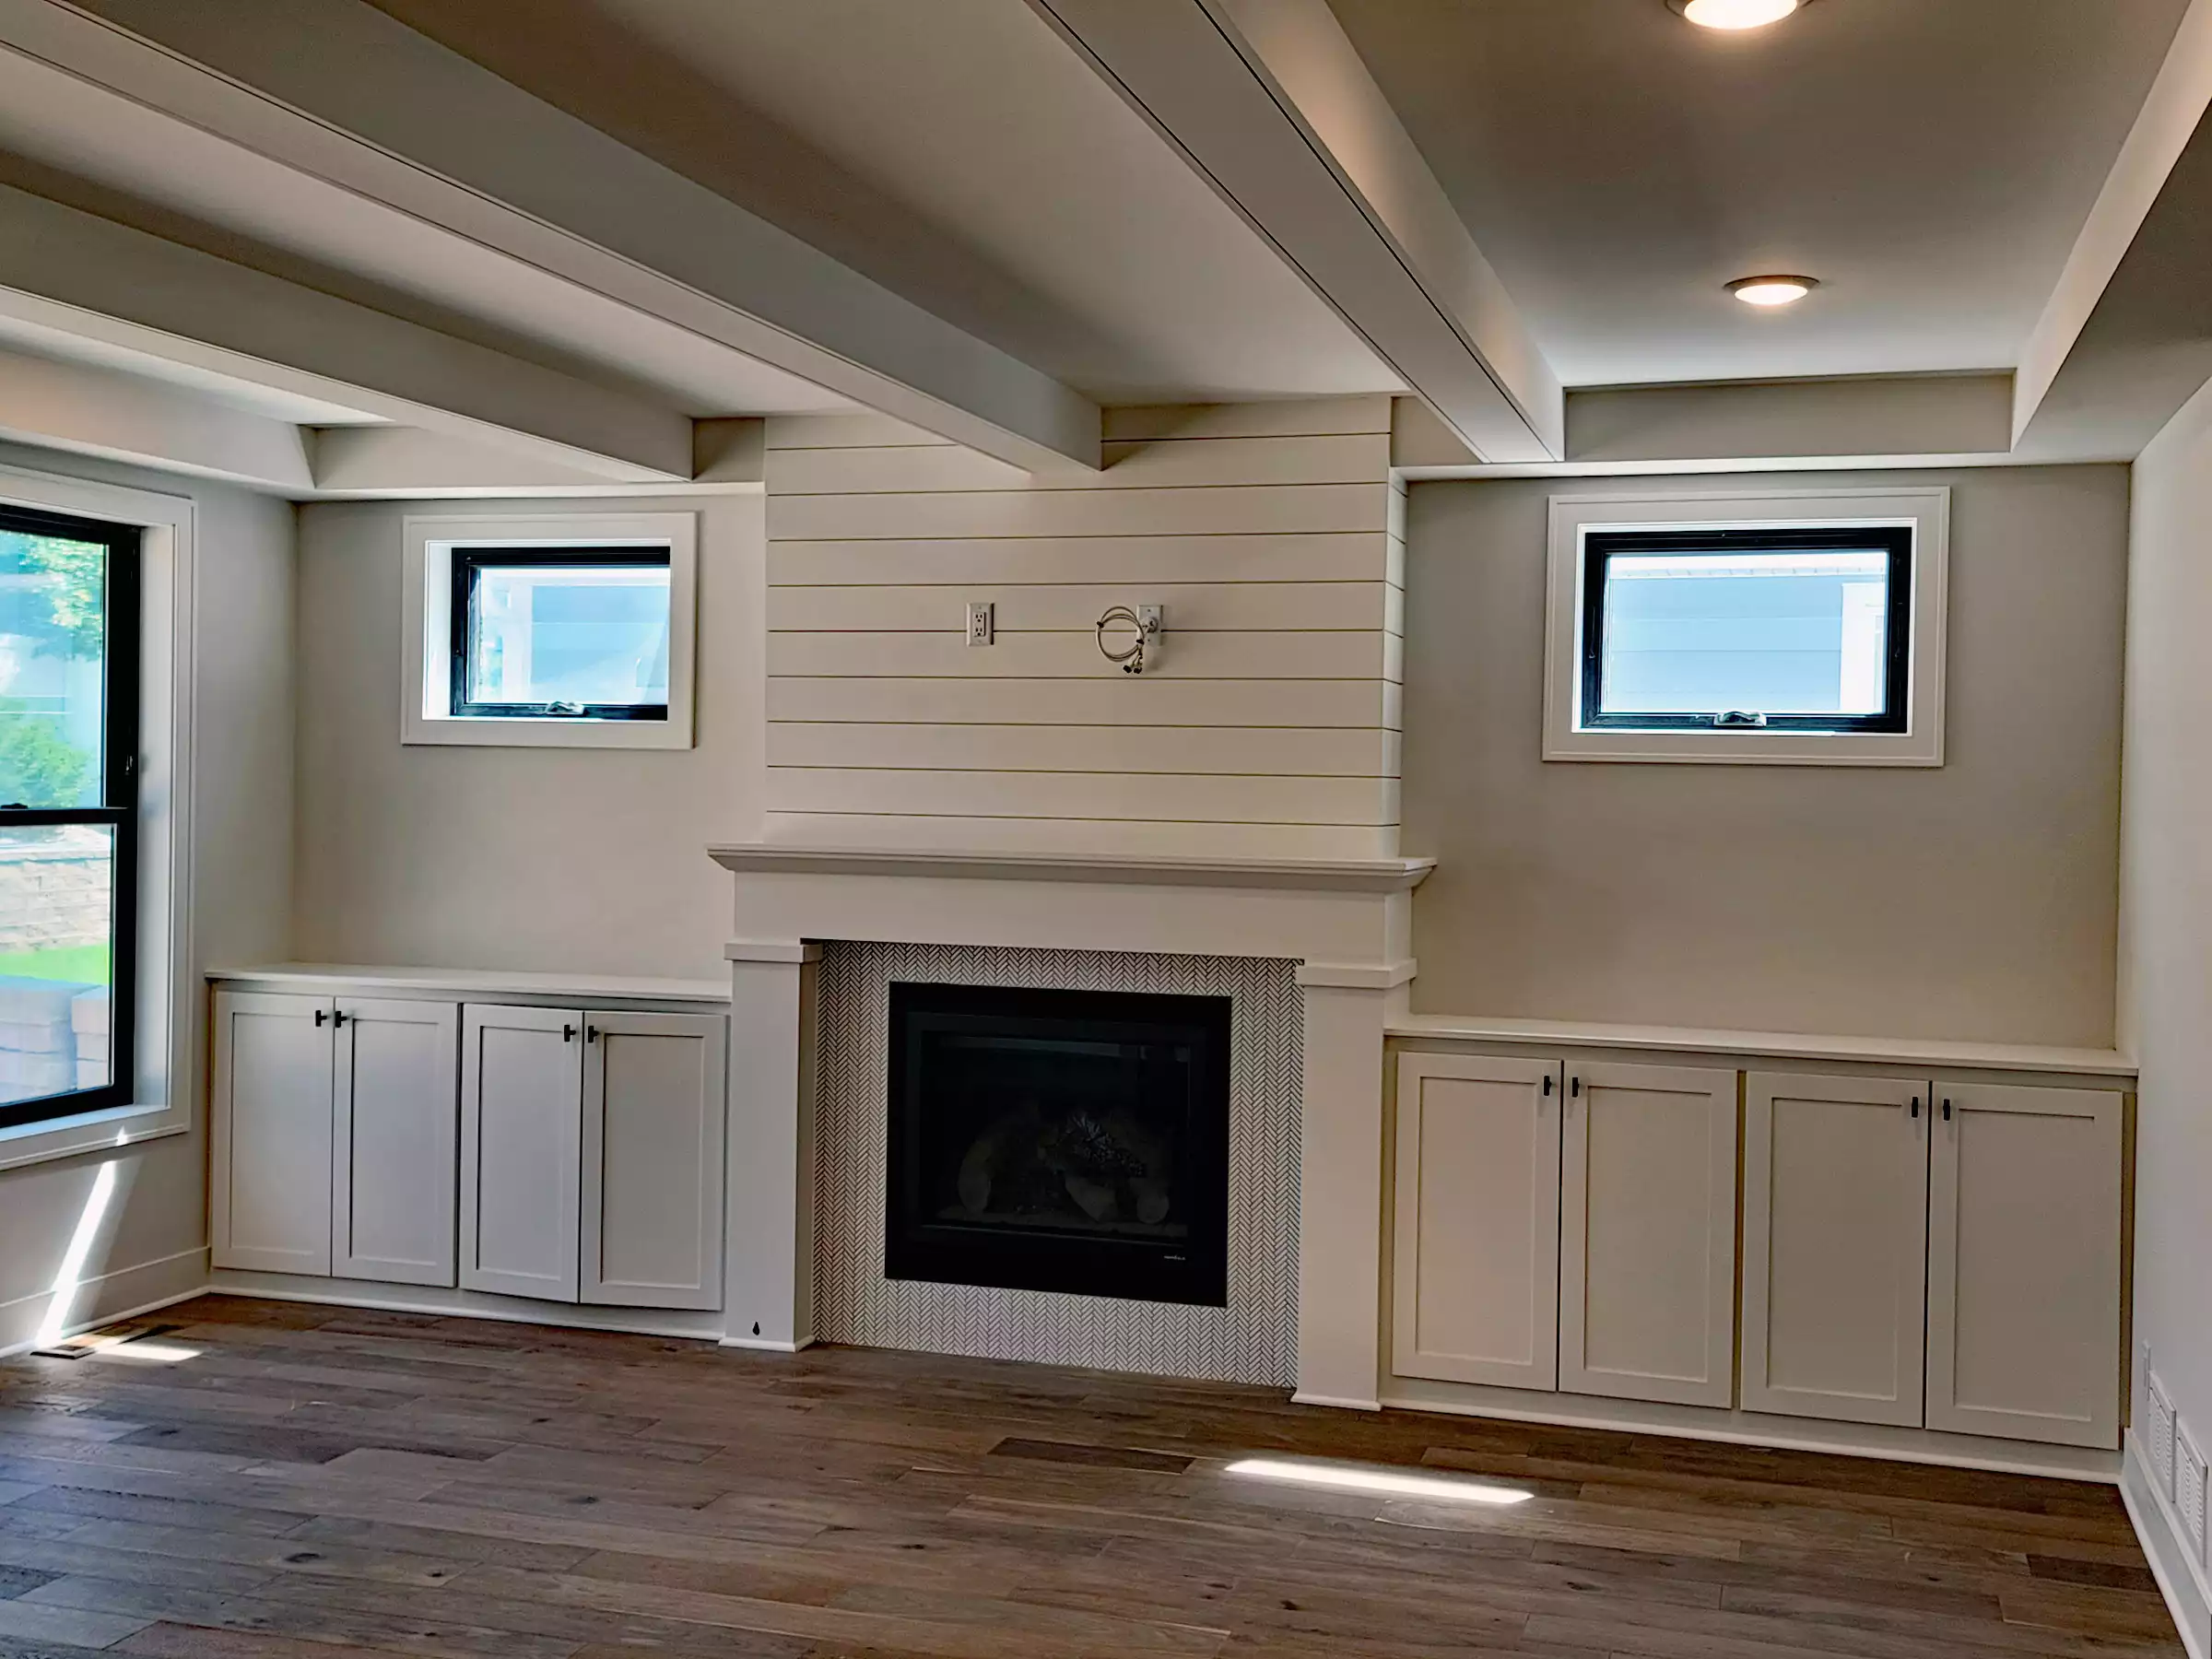 Media wall with fireplace, built-in cabinets and sidelite windows